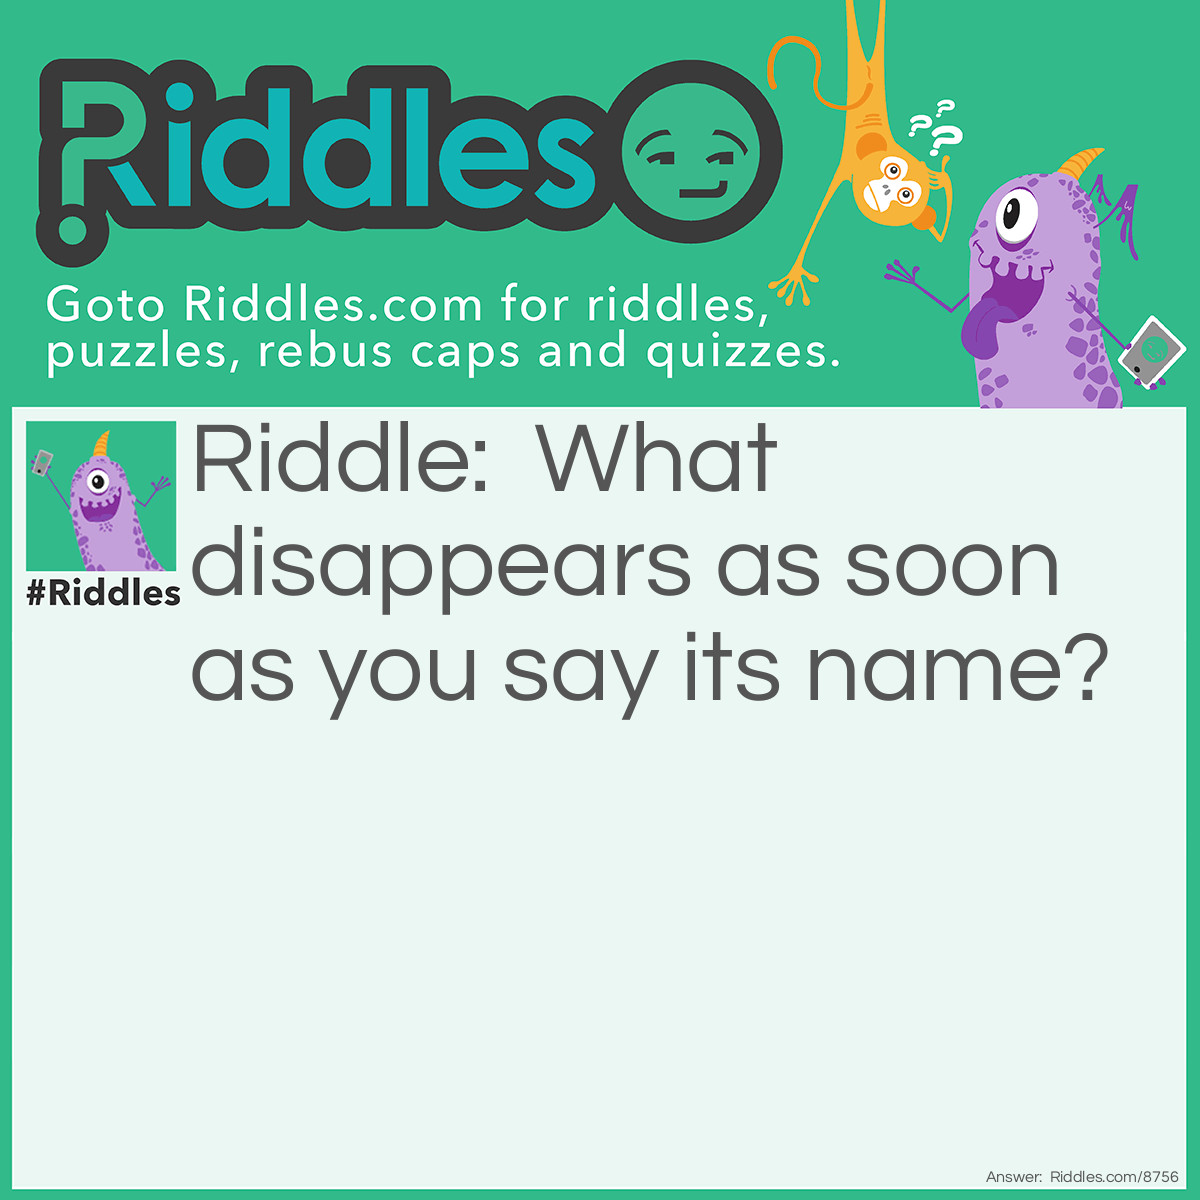 Riddle: What disappears as soon as you say its name? Answer: Silence